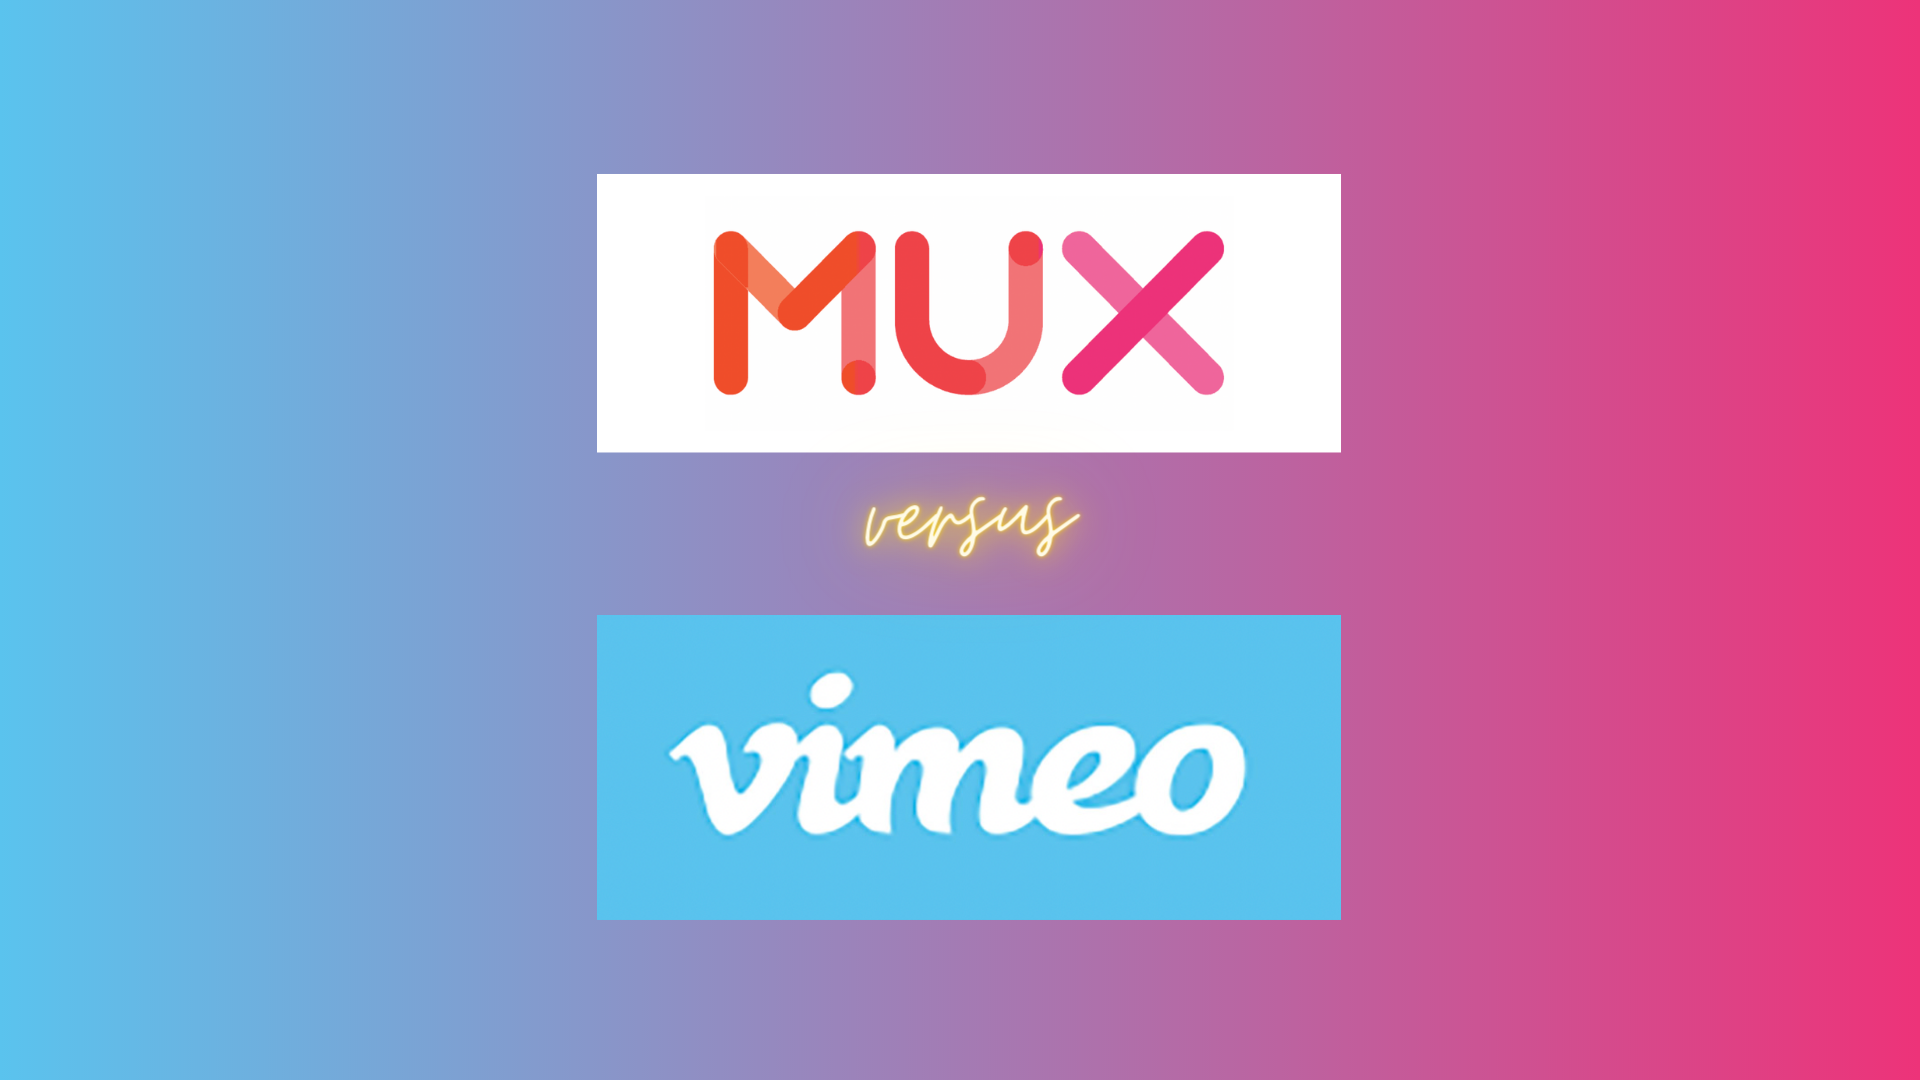 Mux vs Vimeo on blended blue and pink background, with logos. 